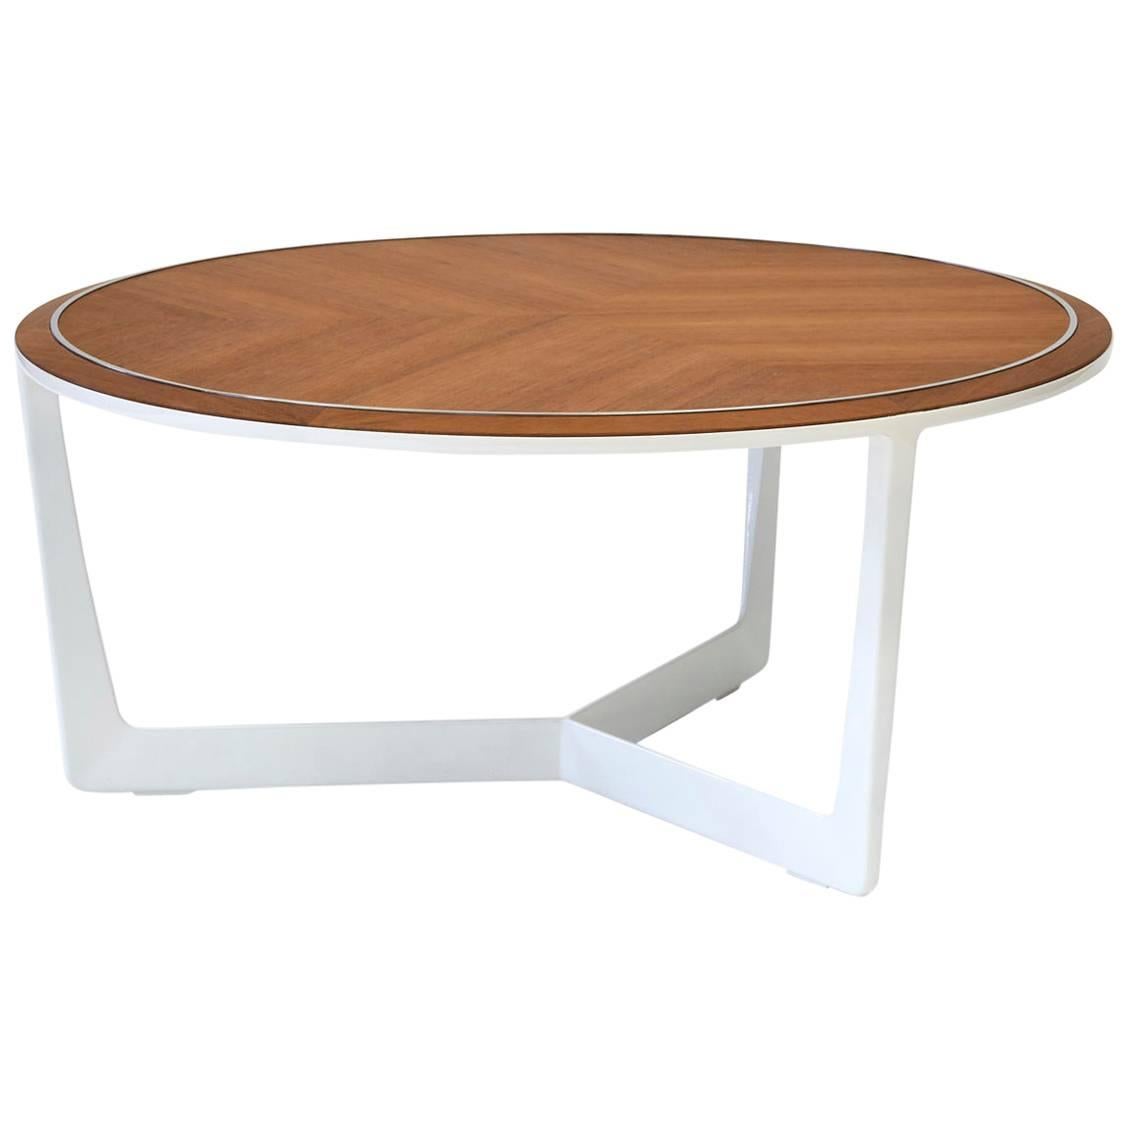 Gosling Marine Coffee Table For Sale